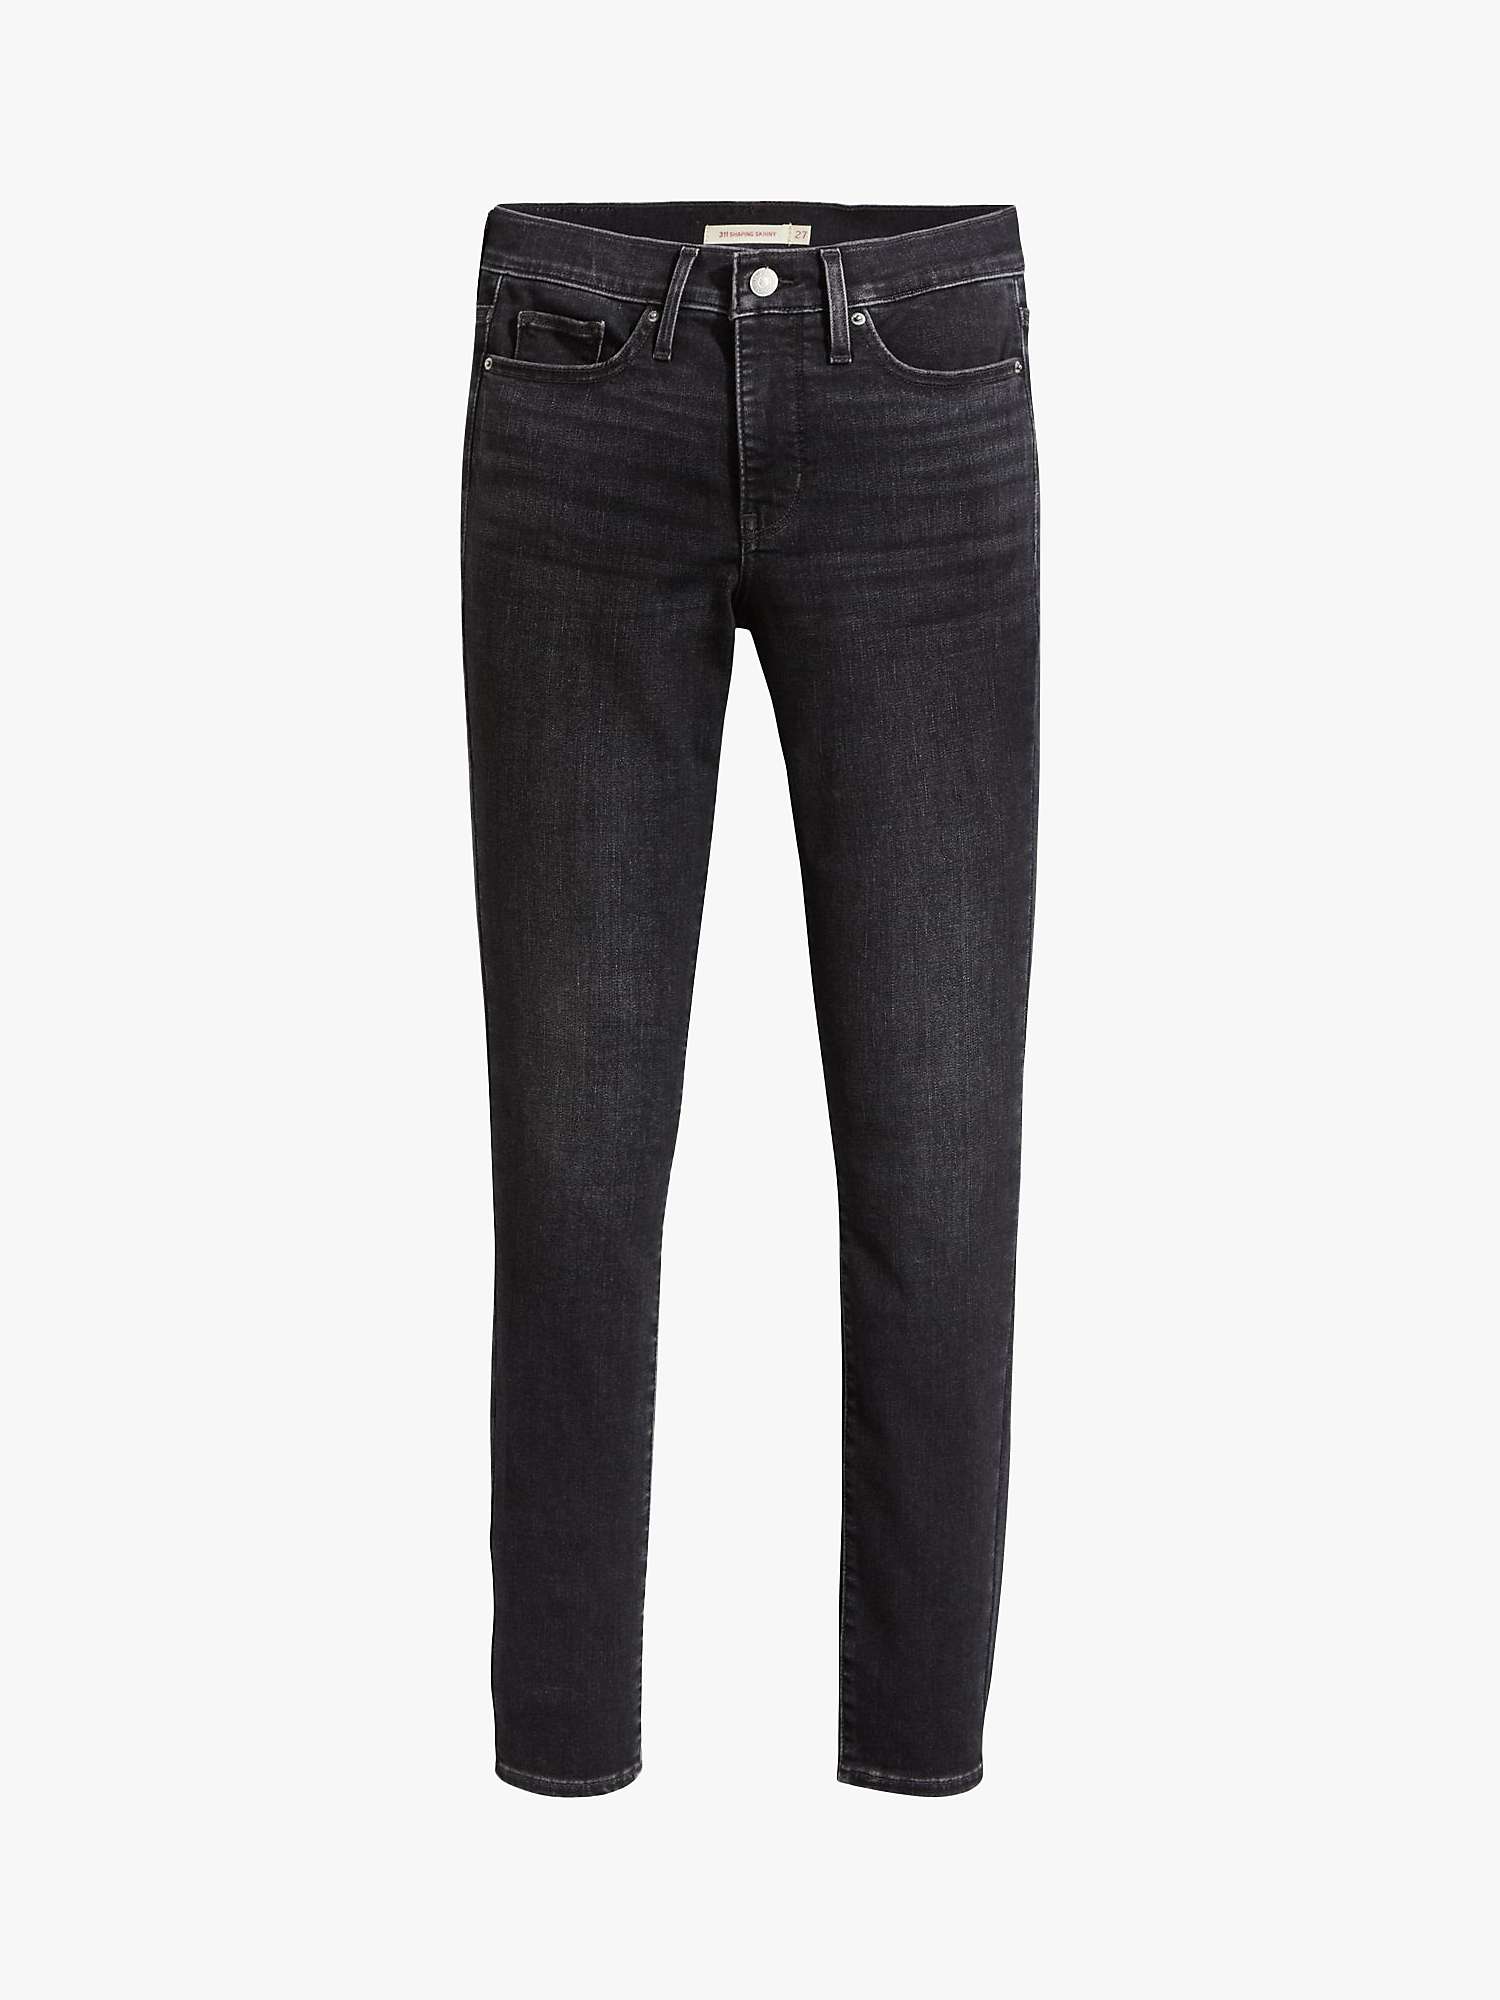 Buy Levi's 311 Shaping Skinny Jeans, Pebble Grey Online at johnlewis.com